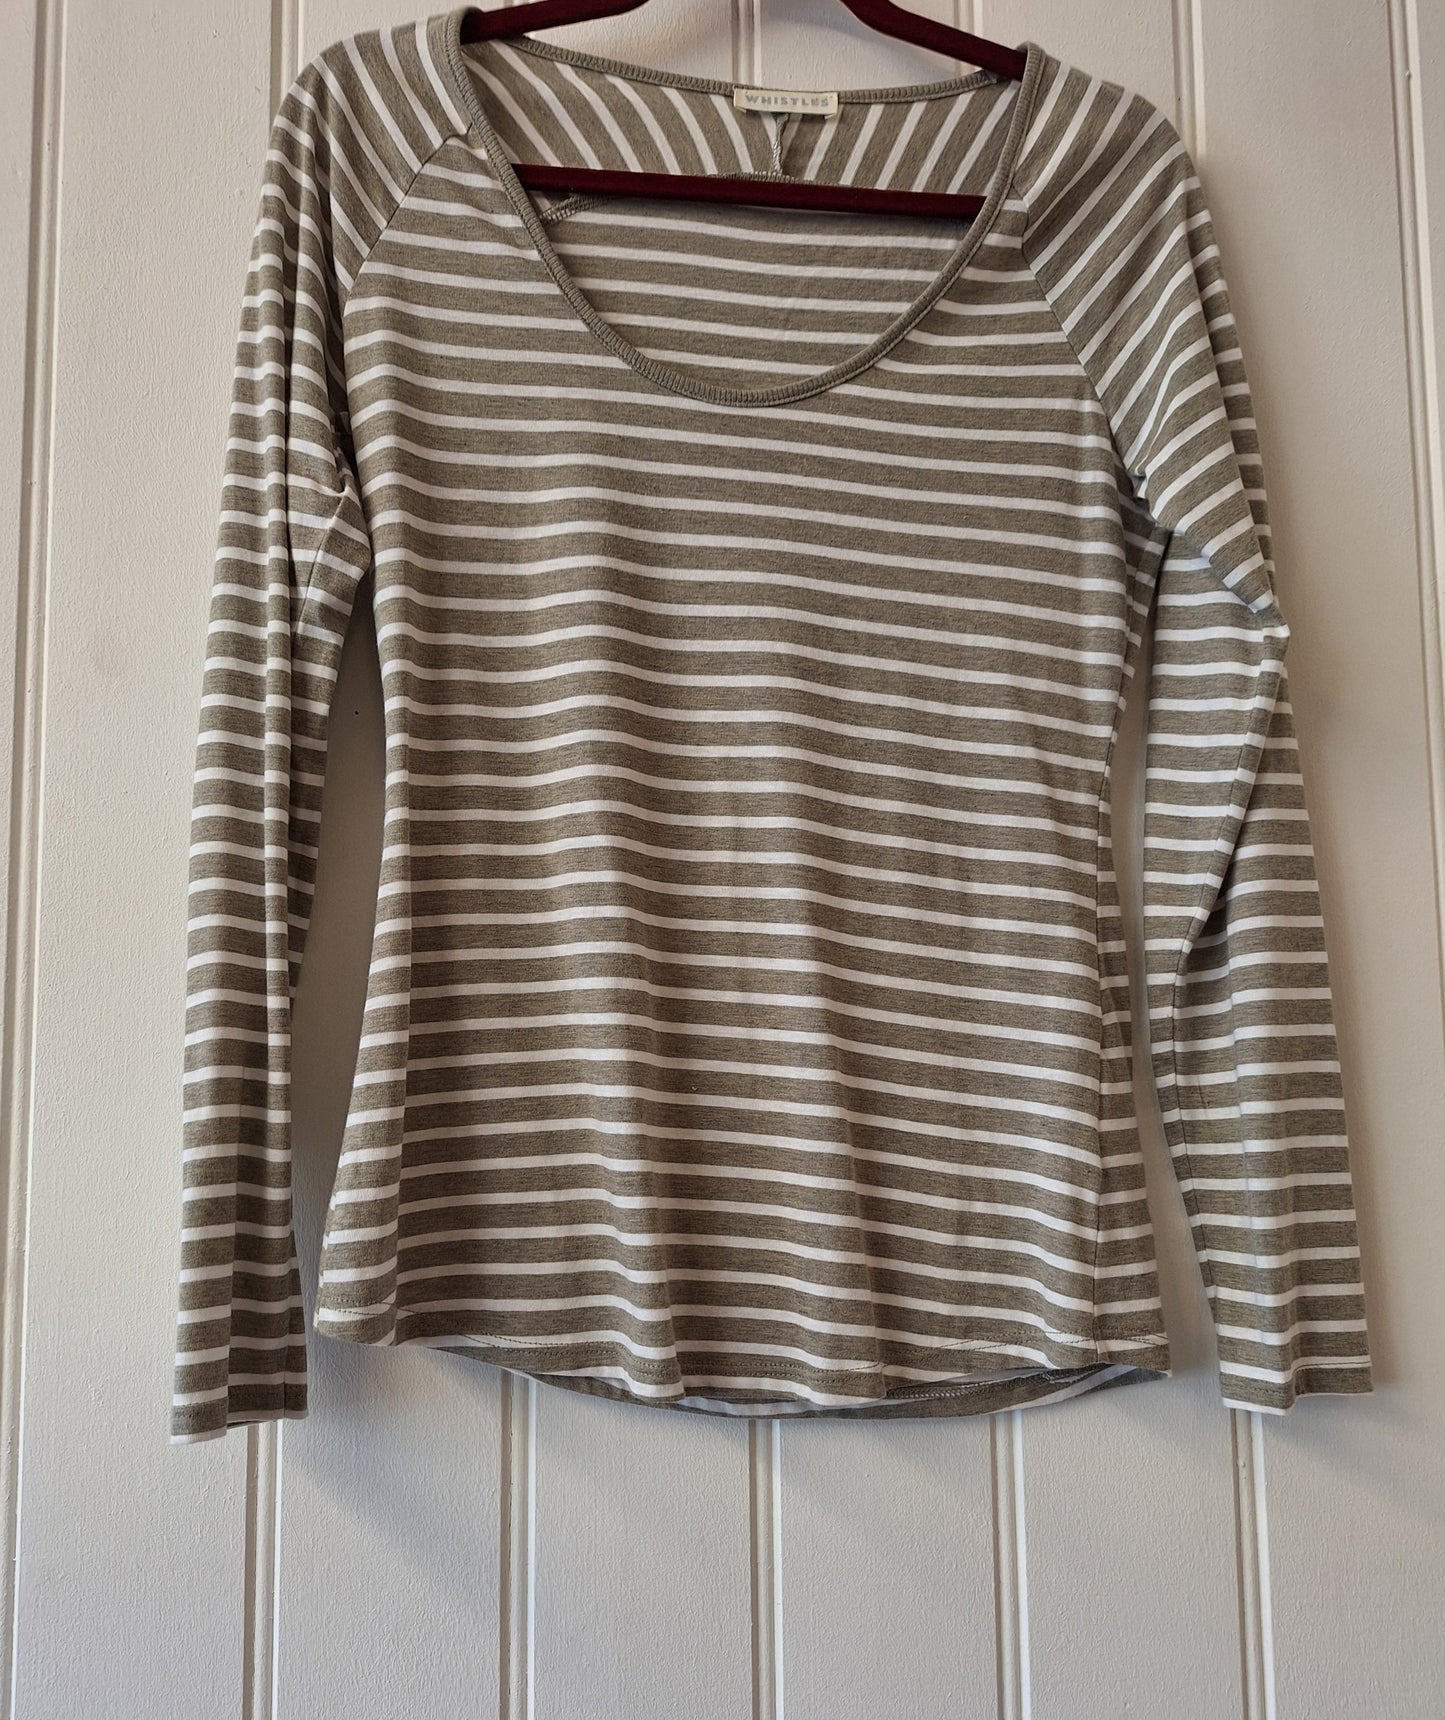 Whistles taupe and white striped top 10